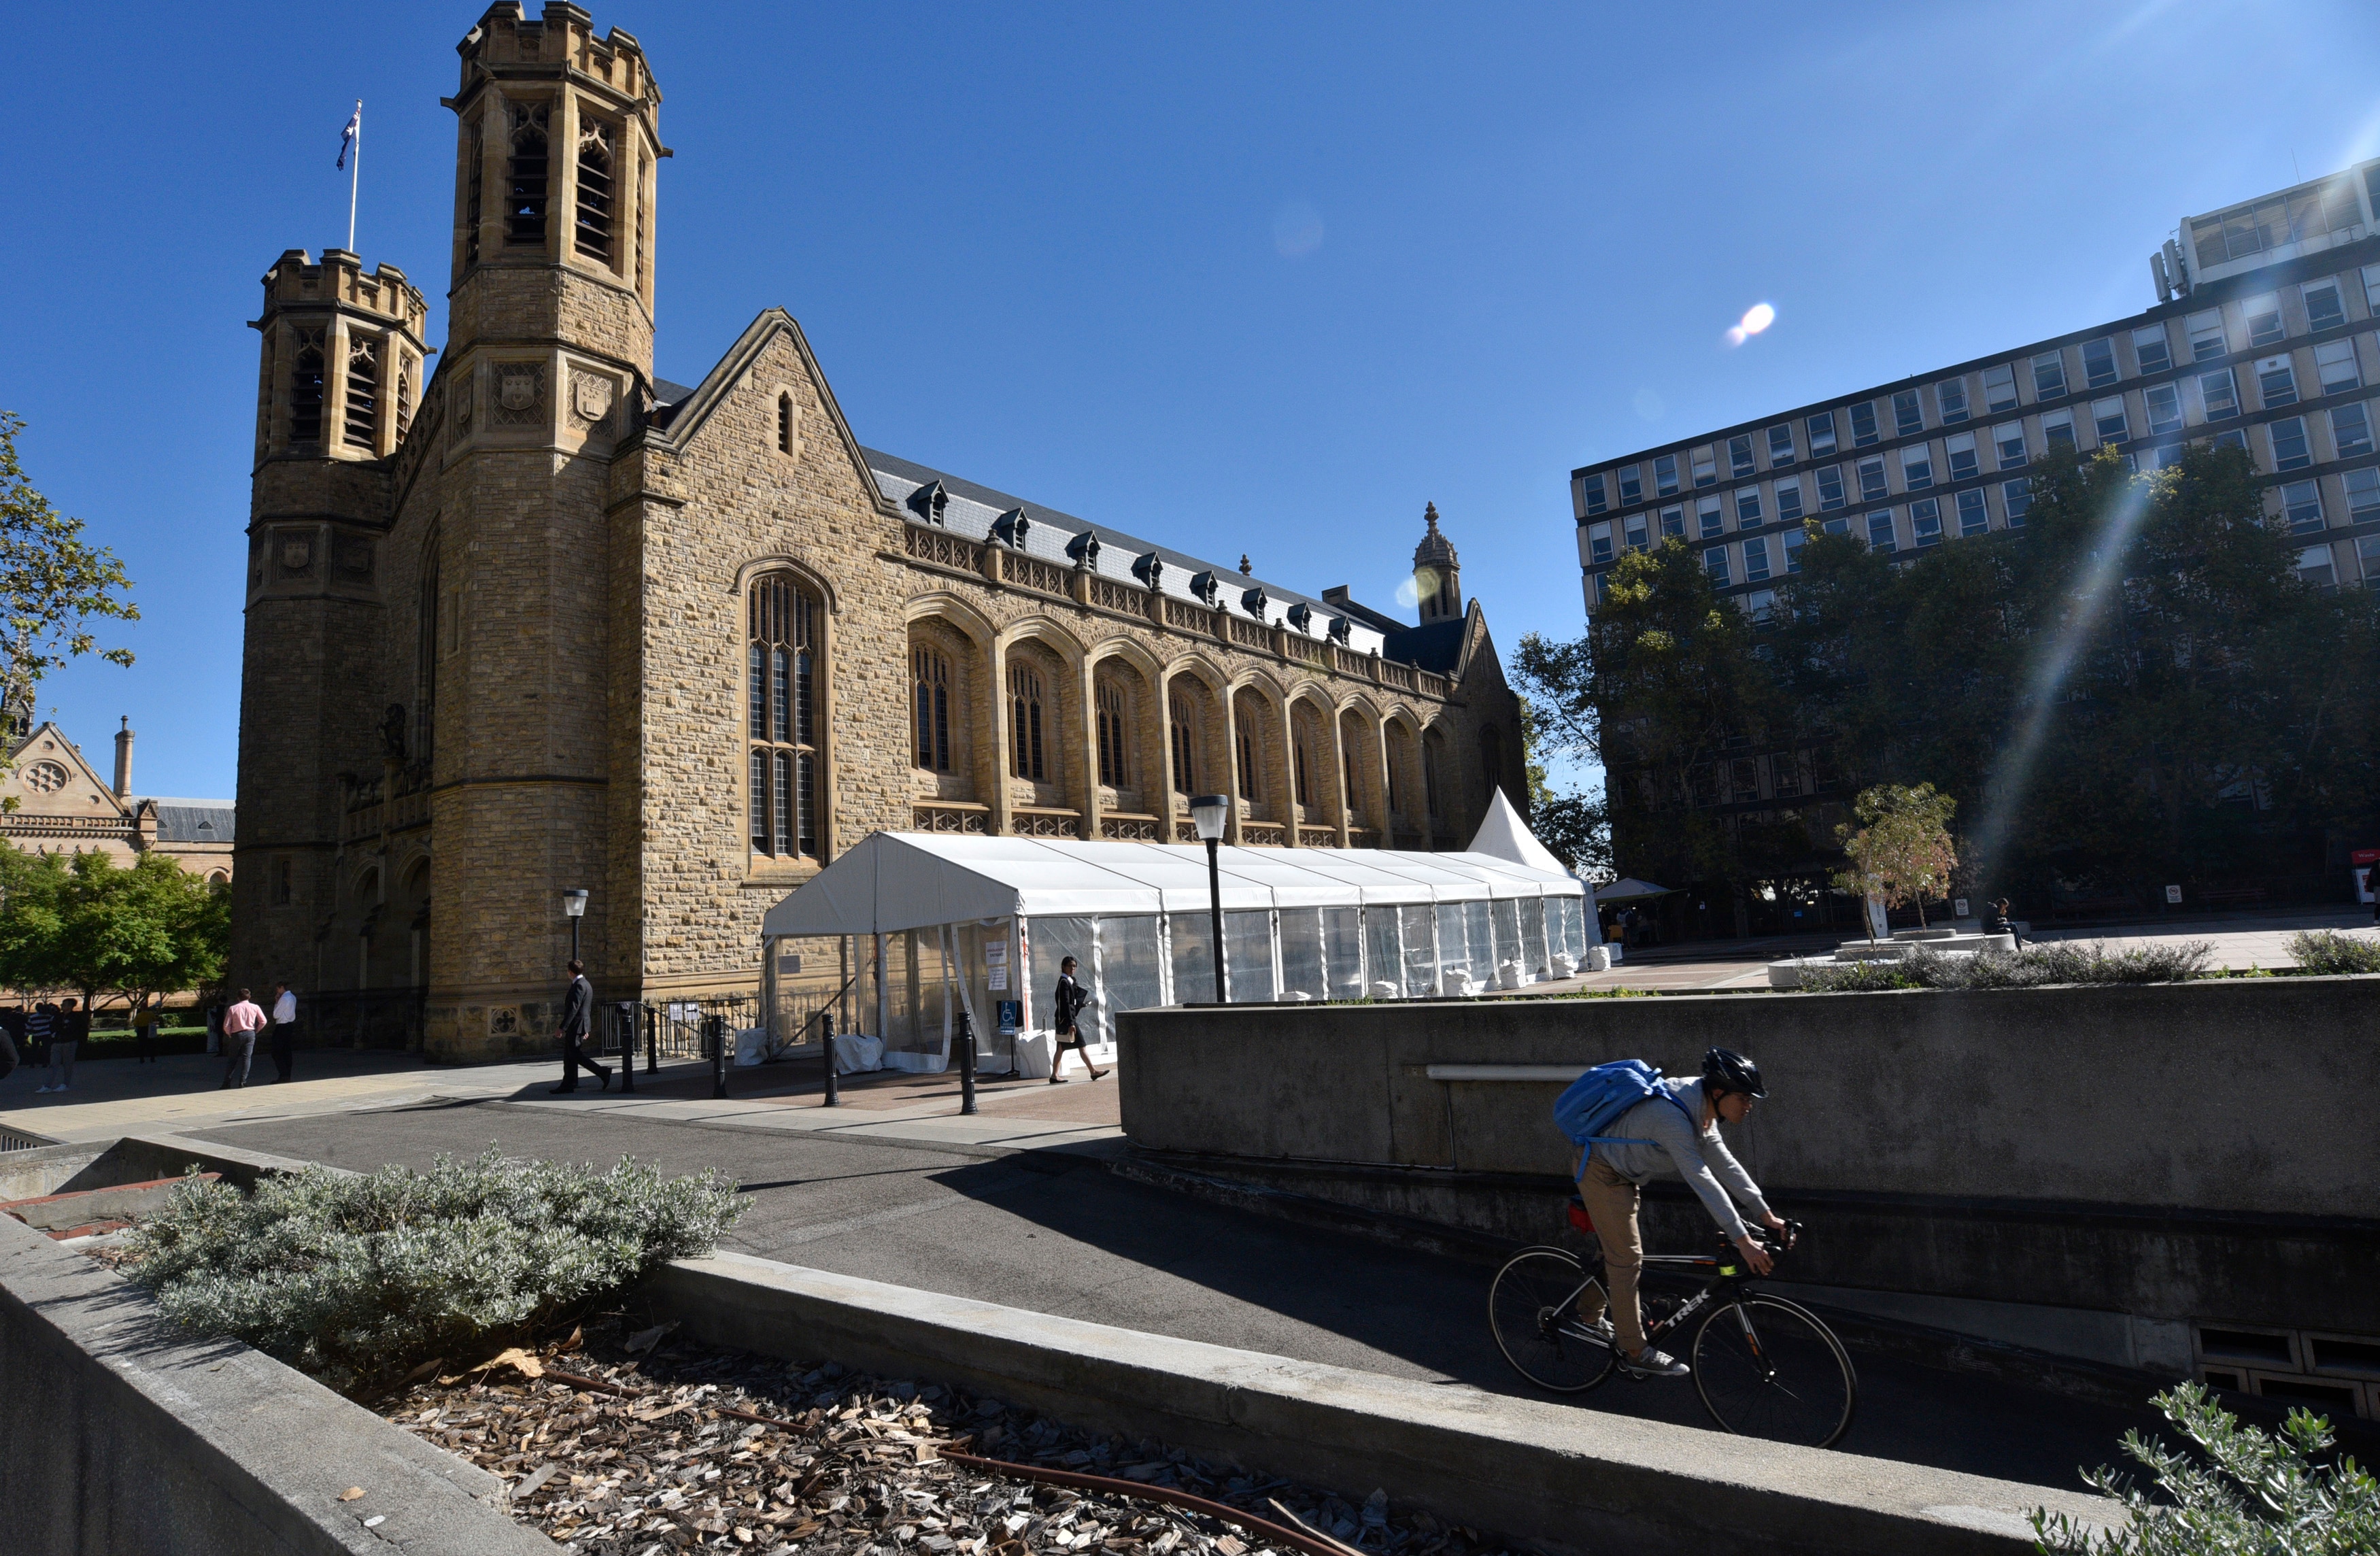 A general view of The University of Adelaide in Adelaide, South Australia.